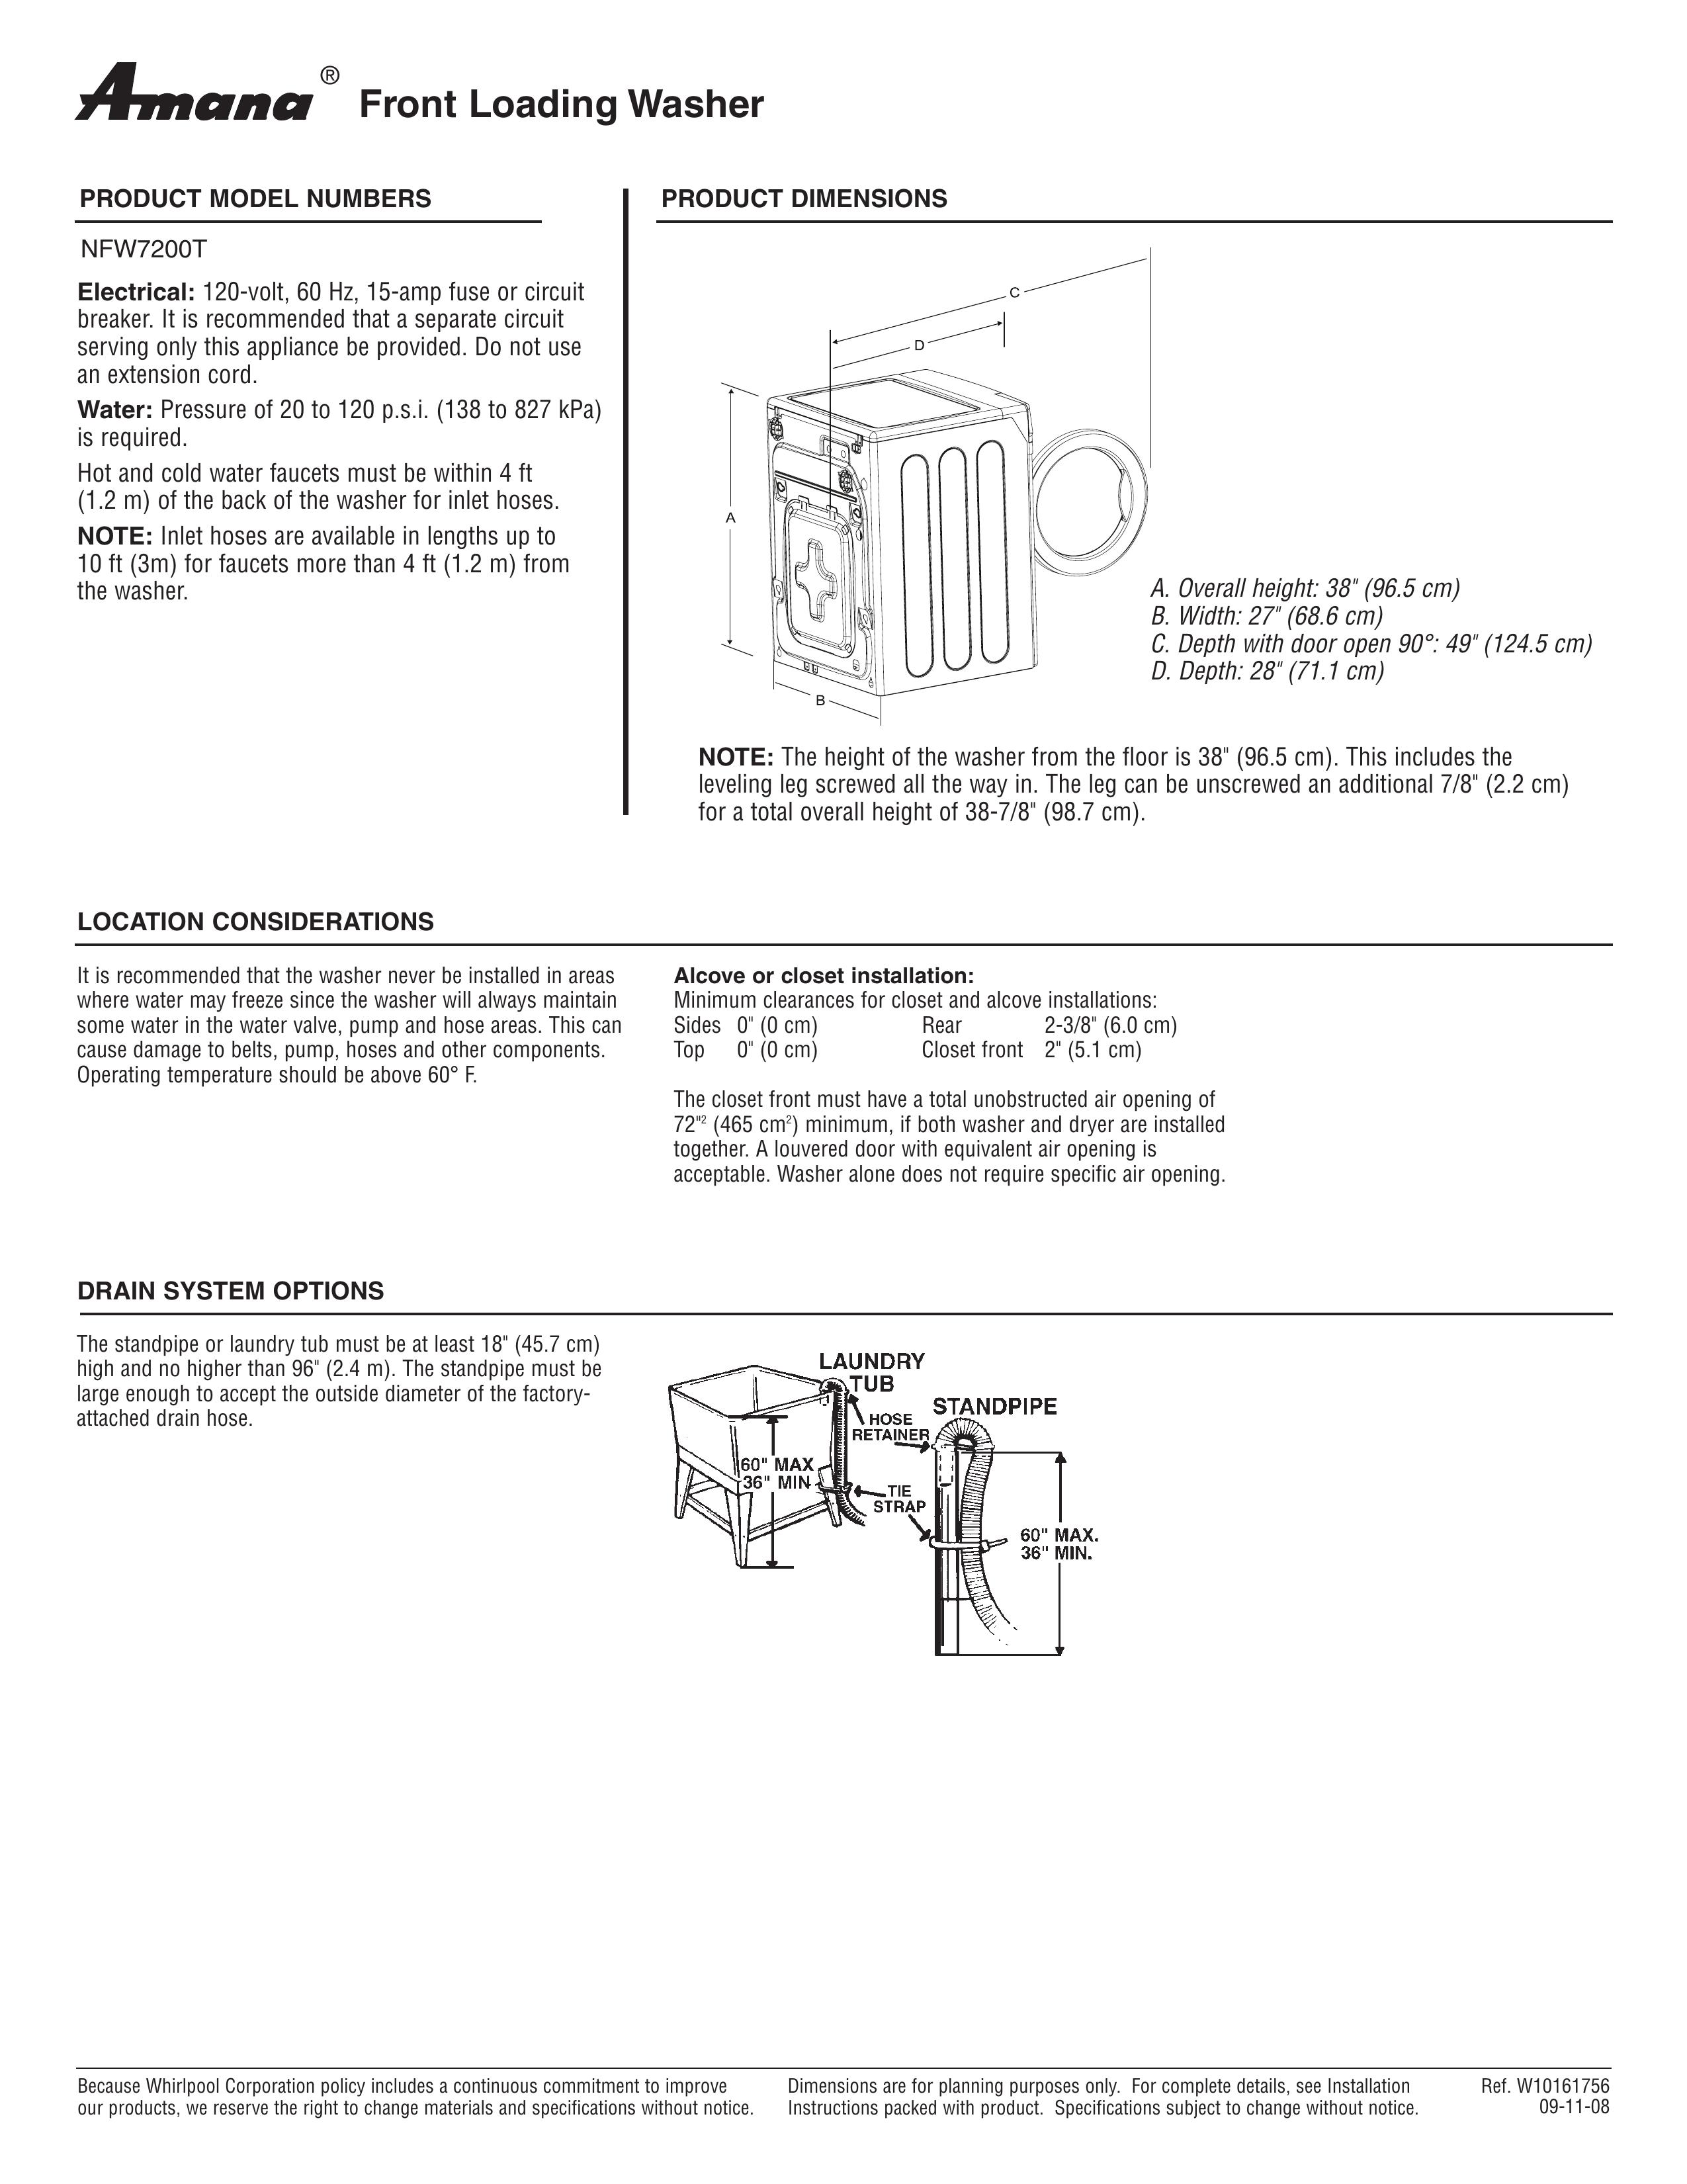 Amana NFW7200TW Washer User Manual